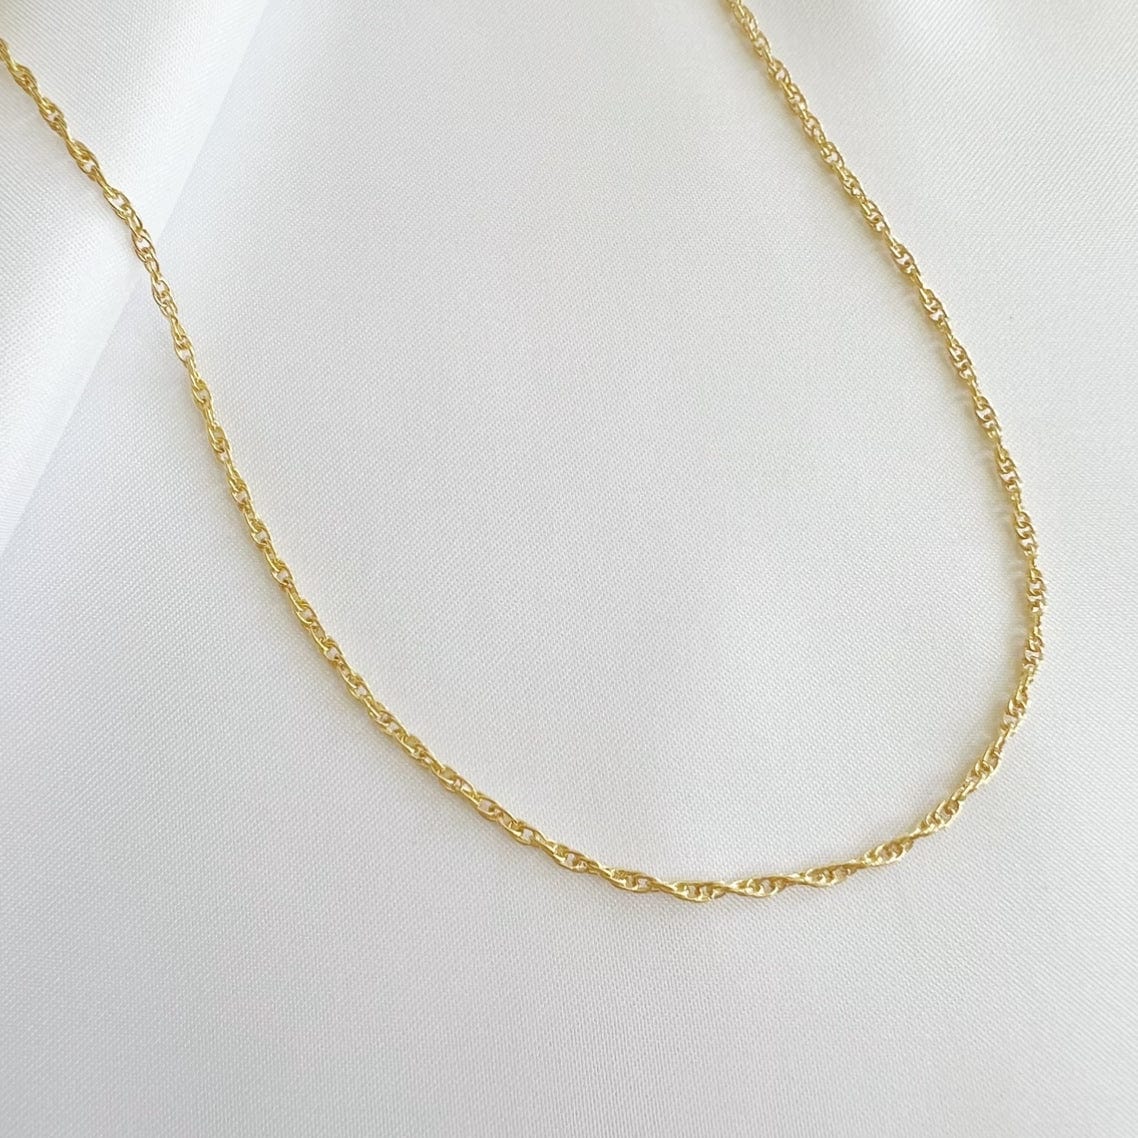 NKL-GF East Coast Rope Layering Chain Necklace Gold Fille